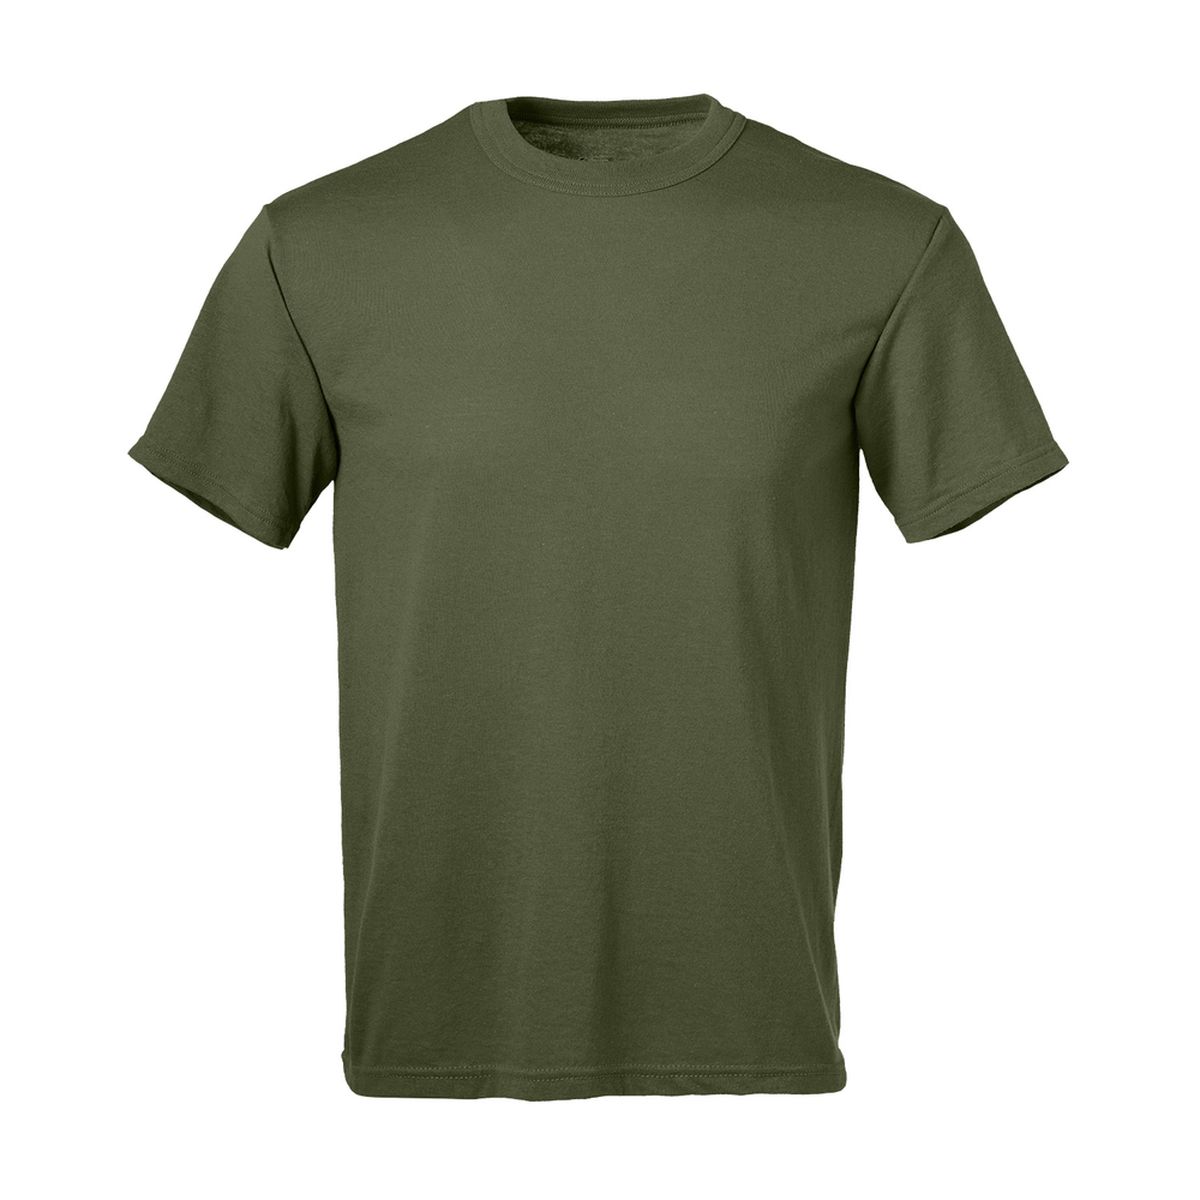 M280-3 Soffe Adult USA 50/50 Military Tee 3-Pack | eBay